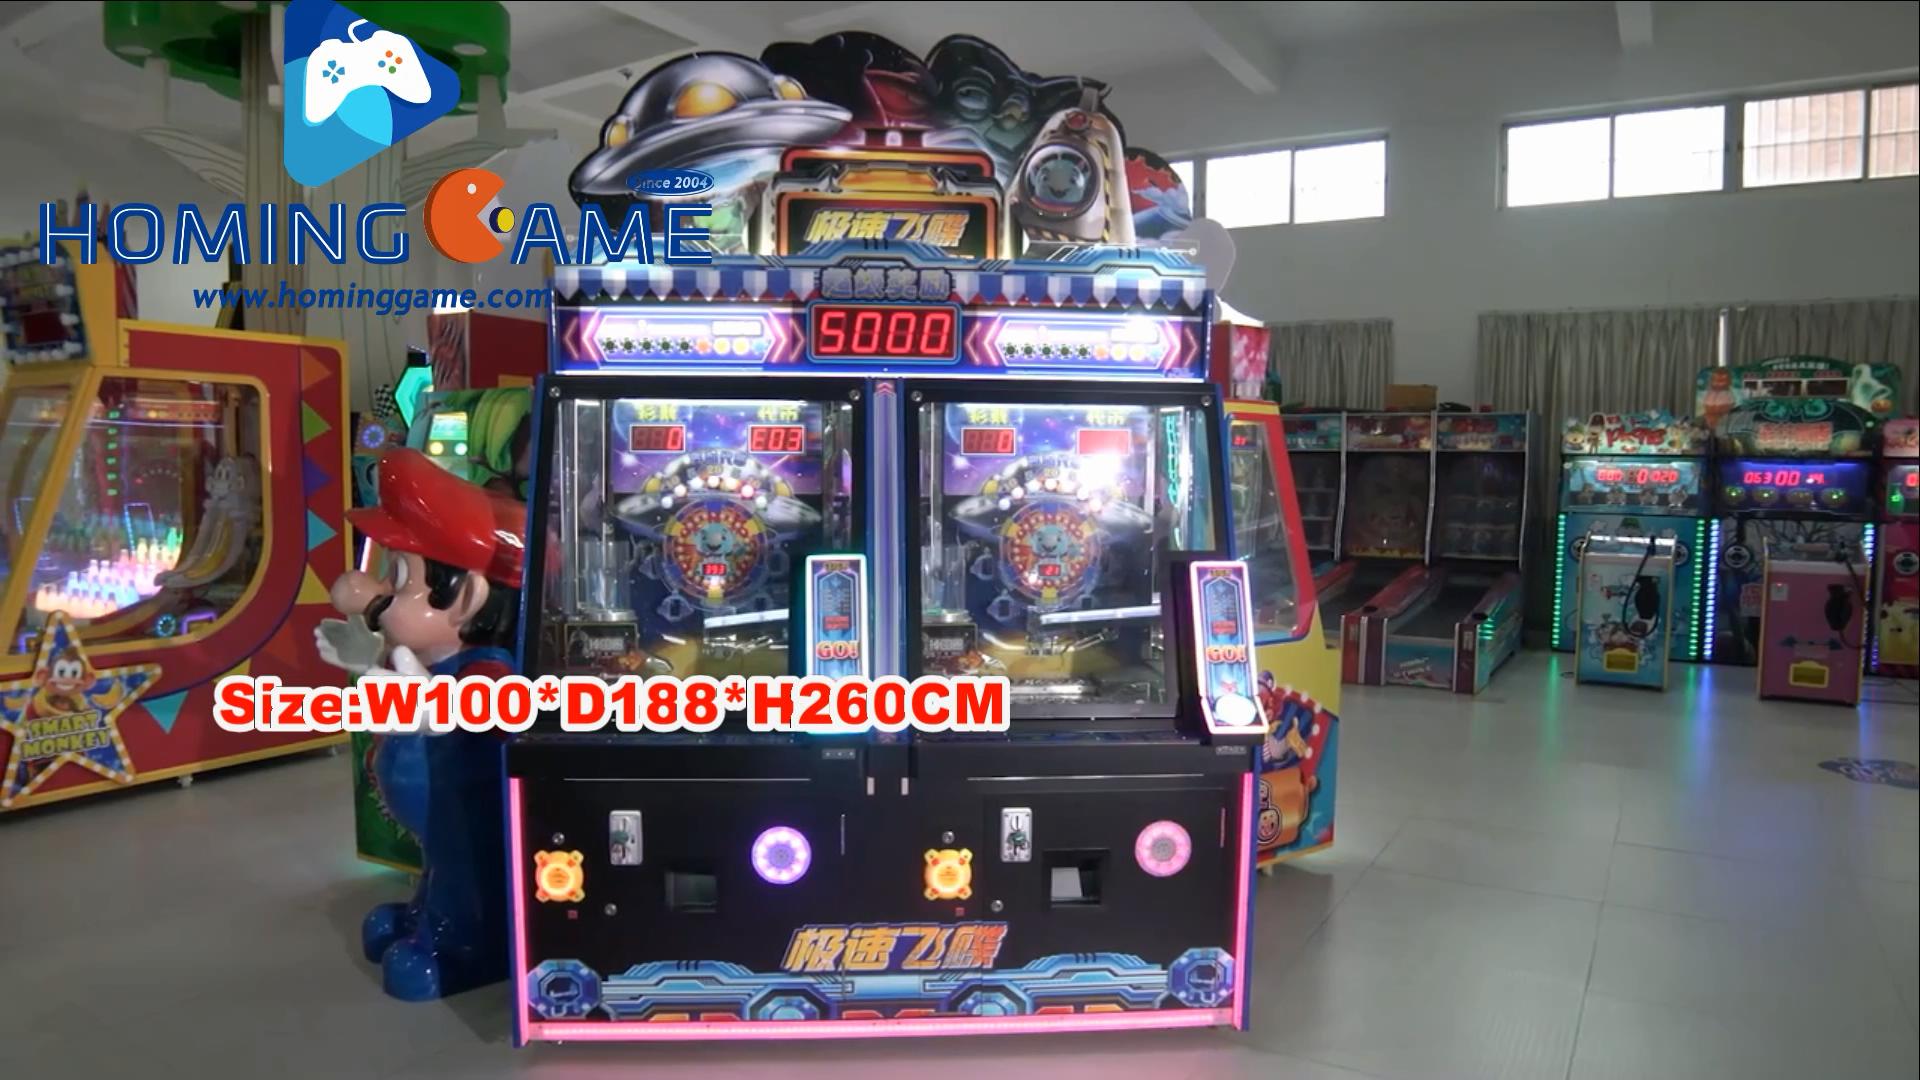 2020 HomingGame Hover Race UFO Coin Pusher Arcade Game Machine